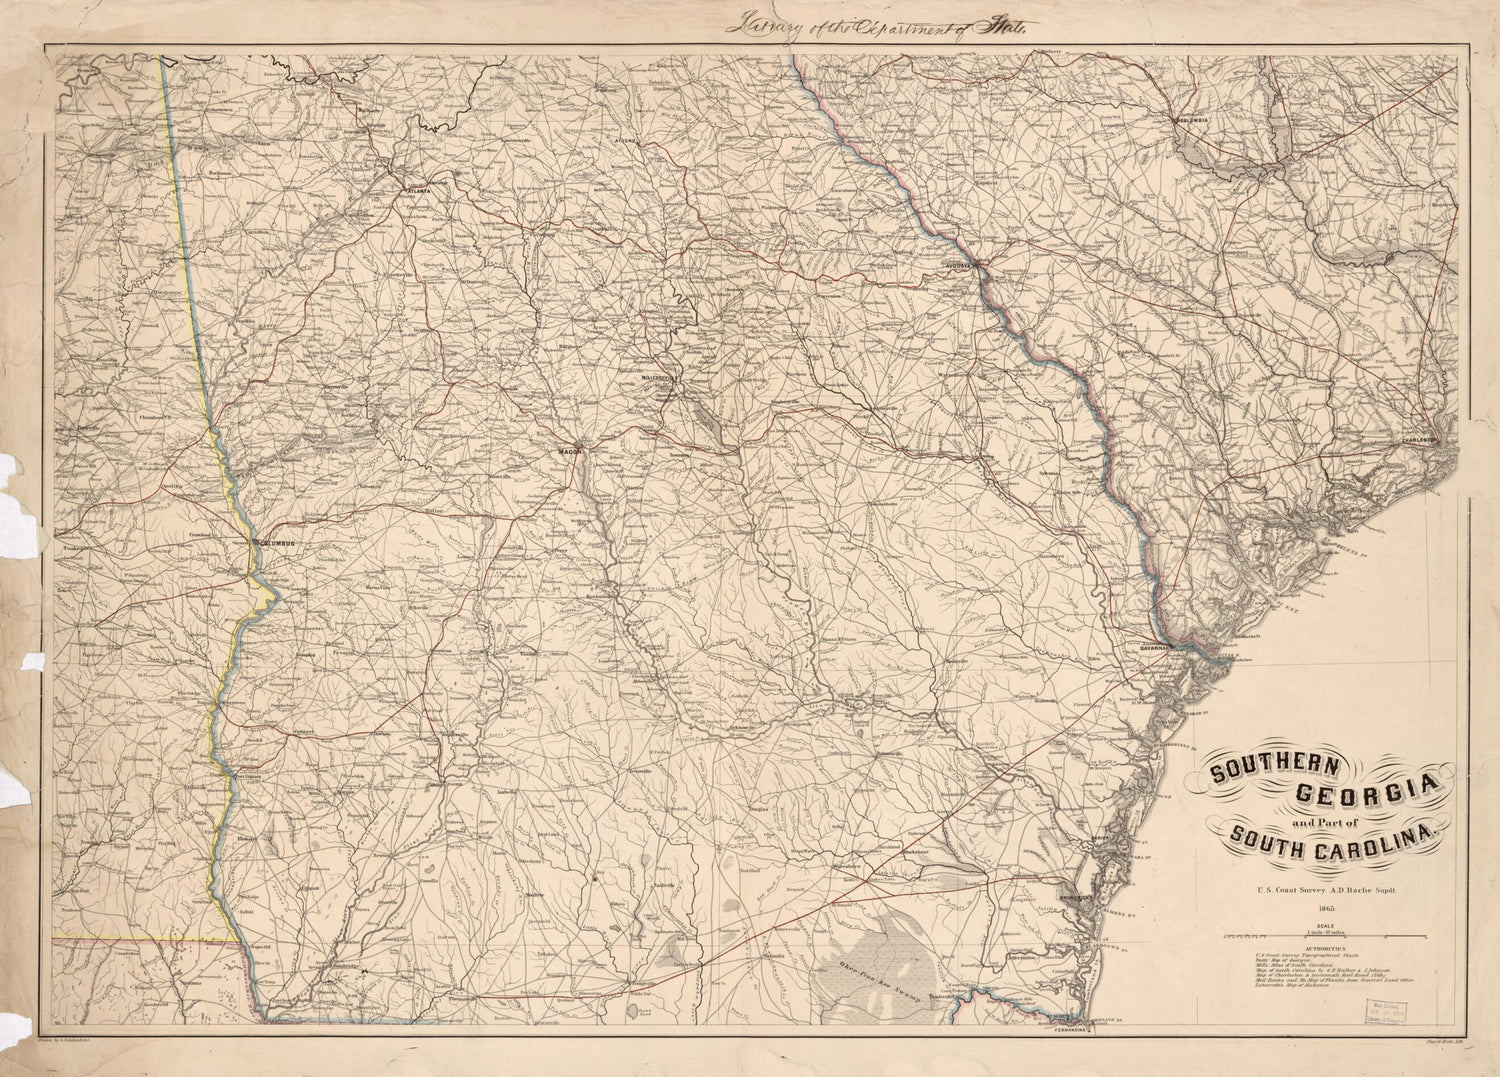 This old map of Southern Georgia and Part of South Carolina from 1865 was created by A. D. (Alexander Dallas) Bache, Charles G. Krebs, A. Lindenkohl,  United States Coast Survey in 1865